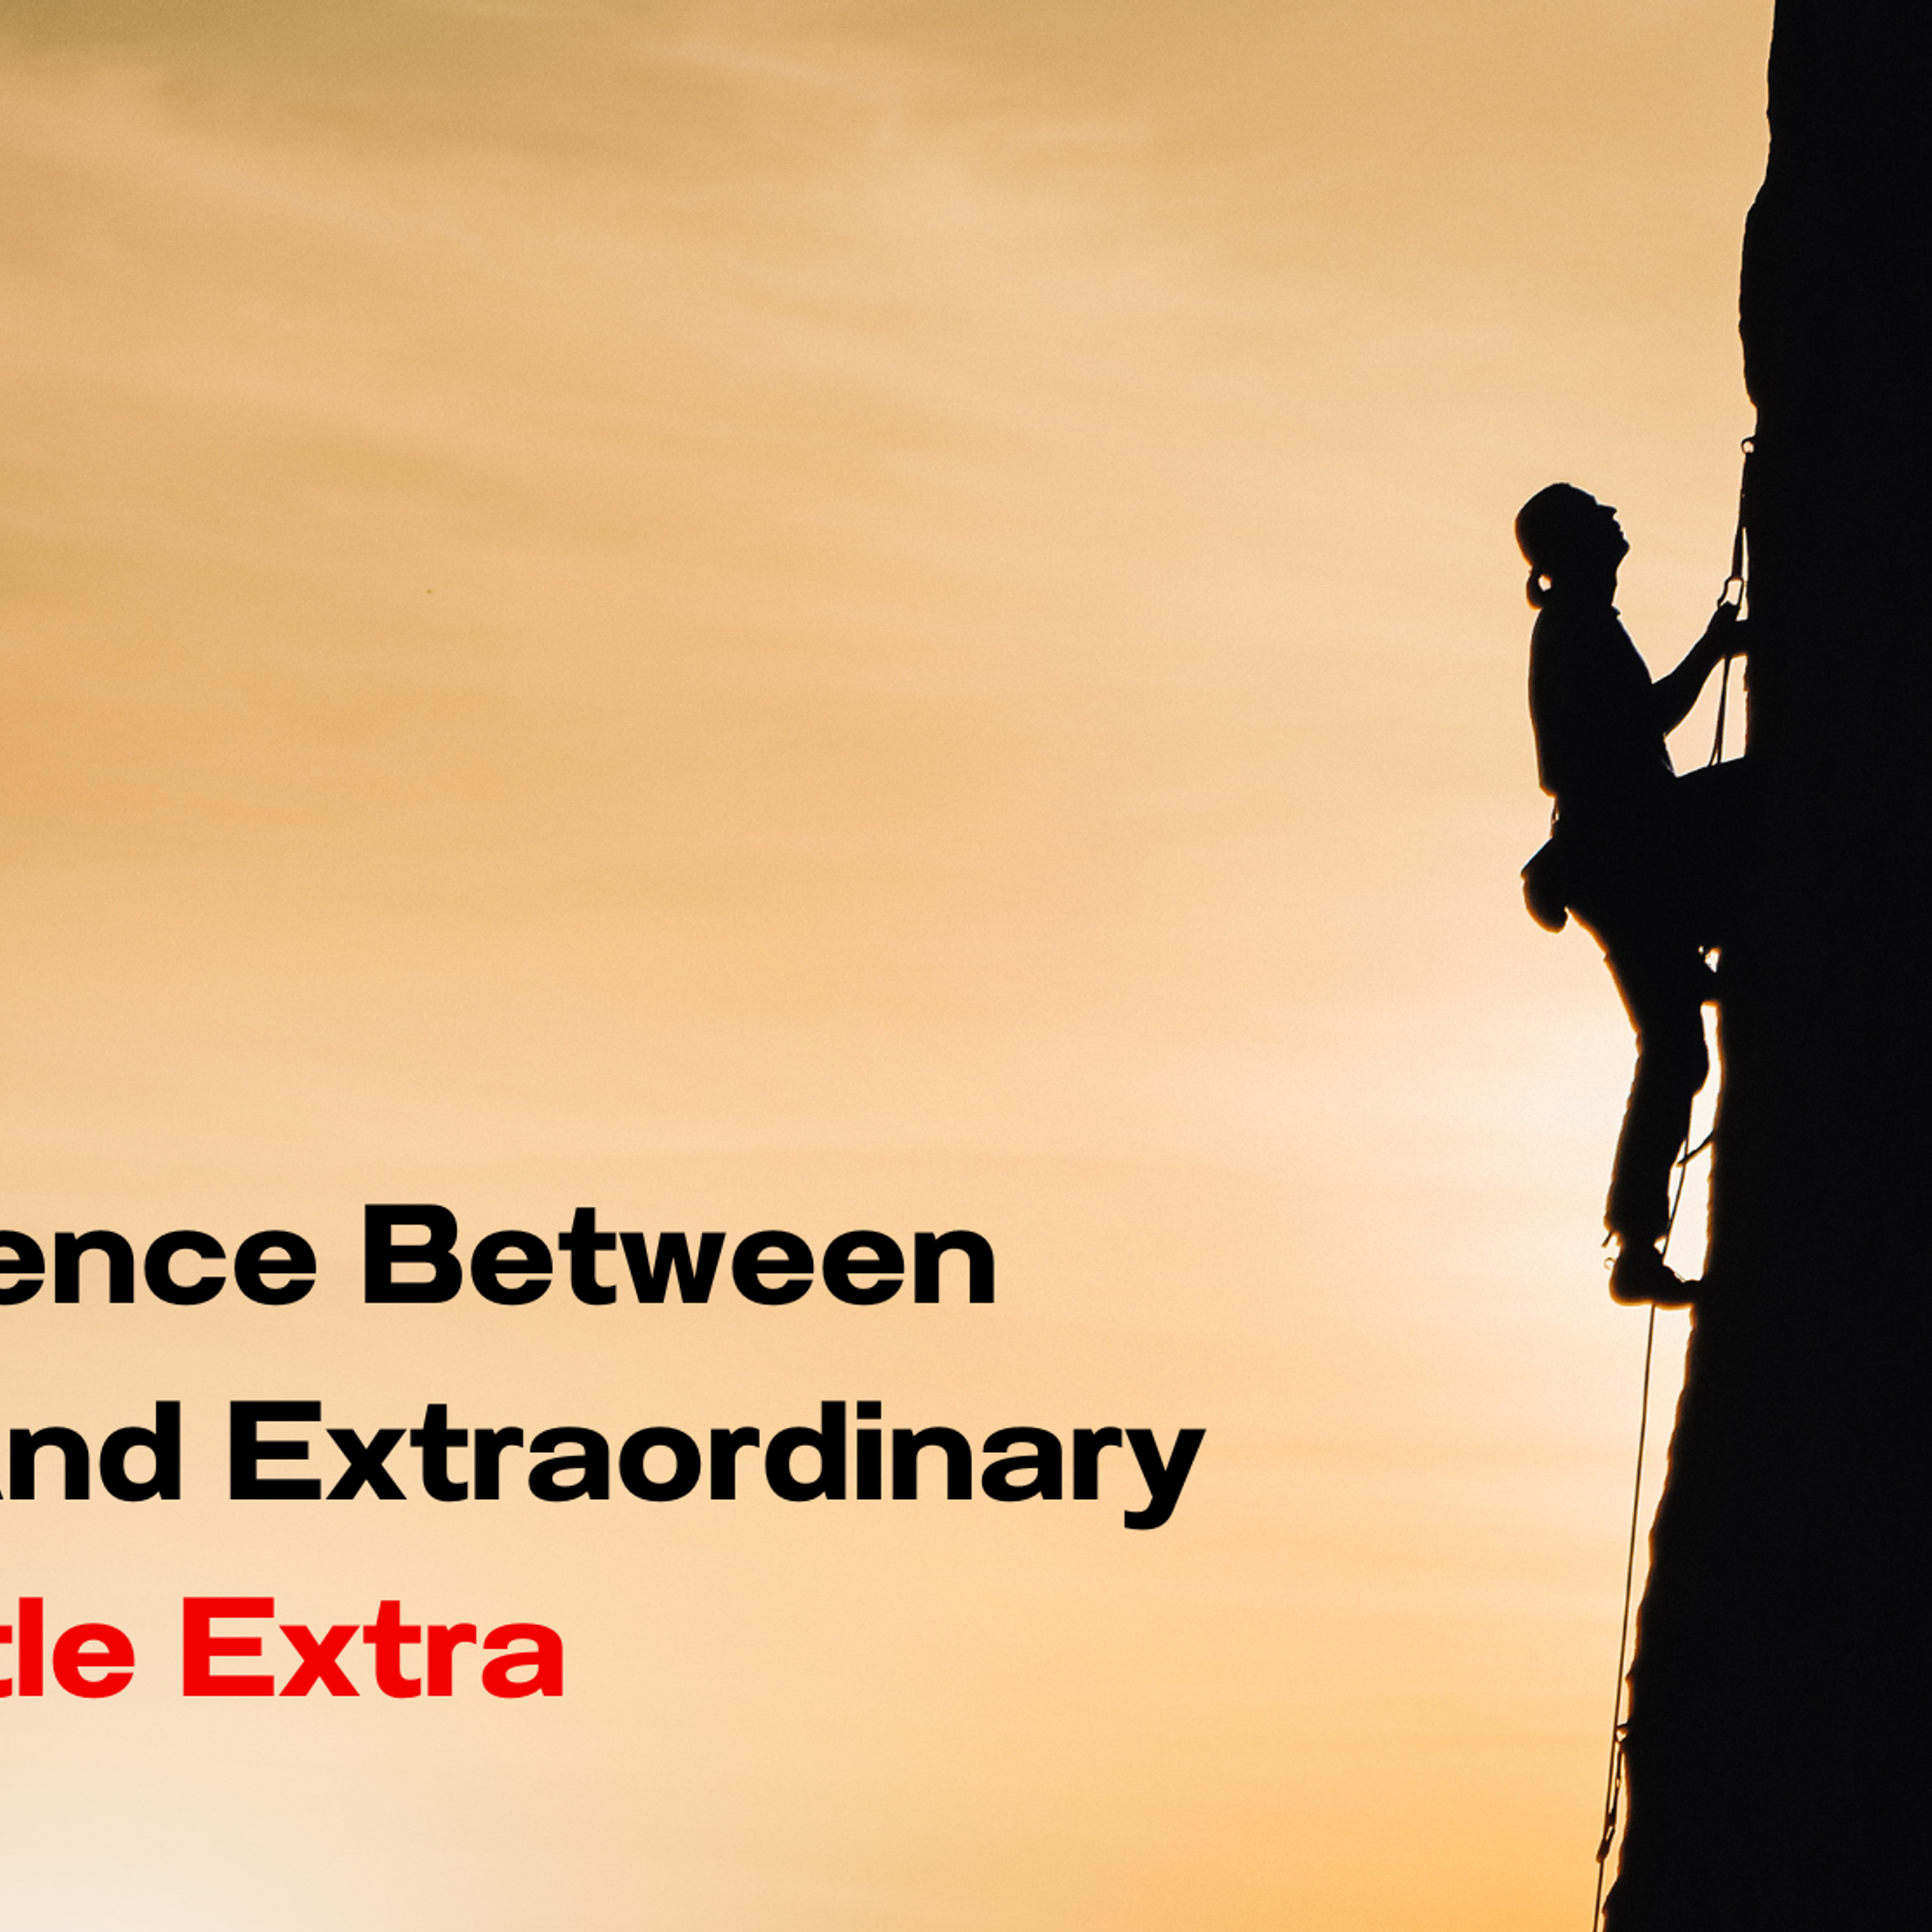 The Difference Between Ordinary And Extraordinary Is That Little Extra